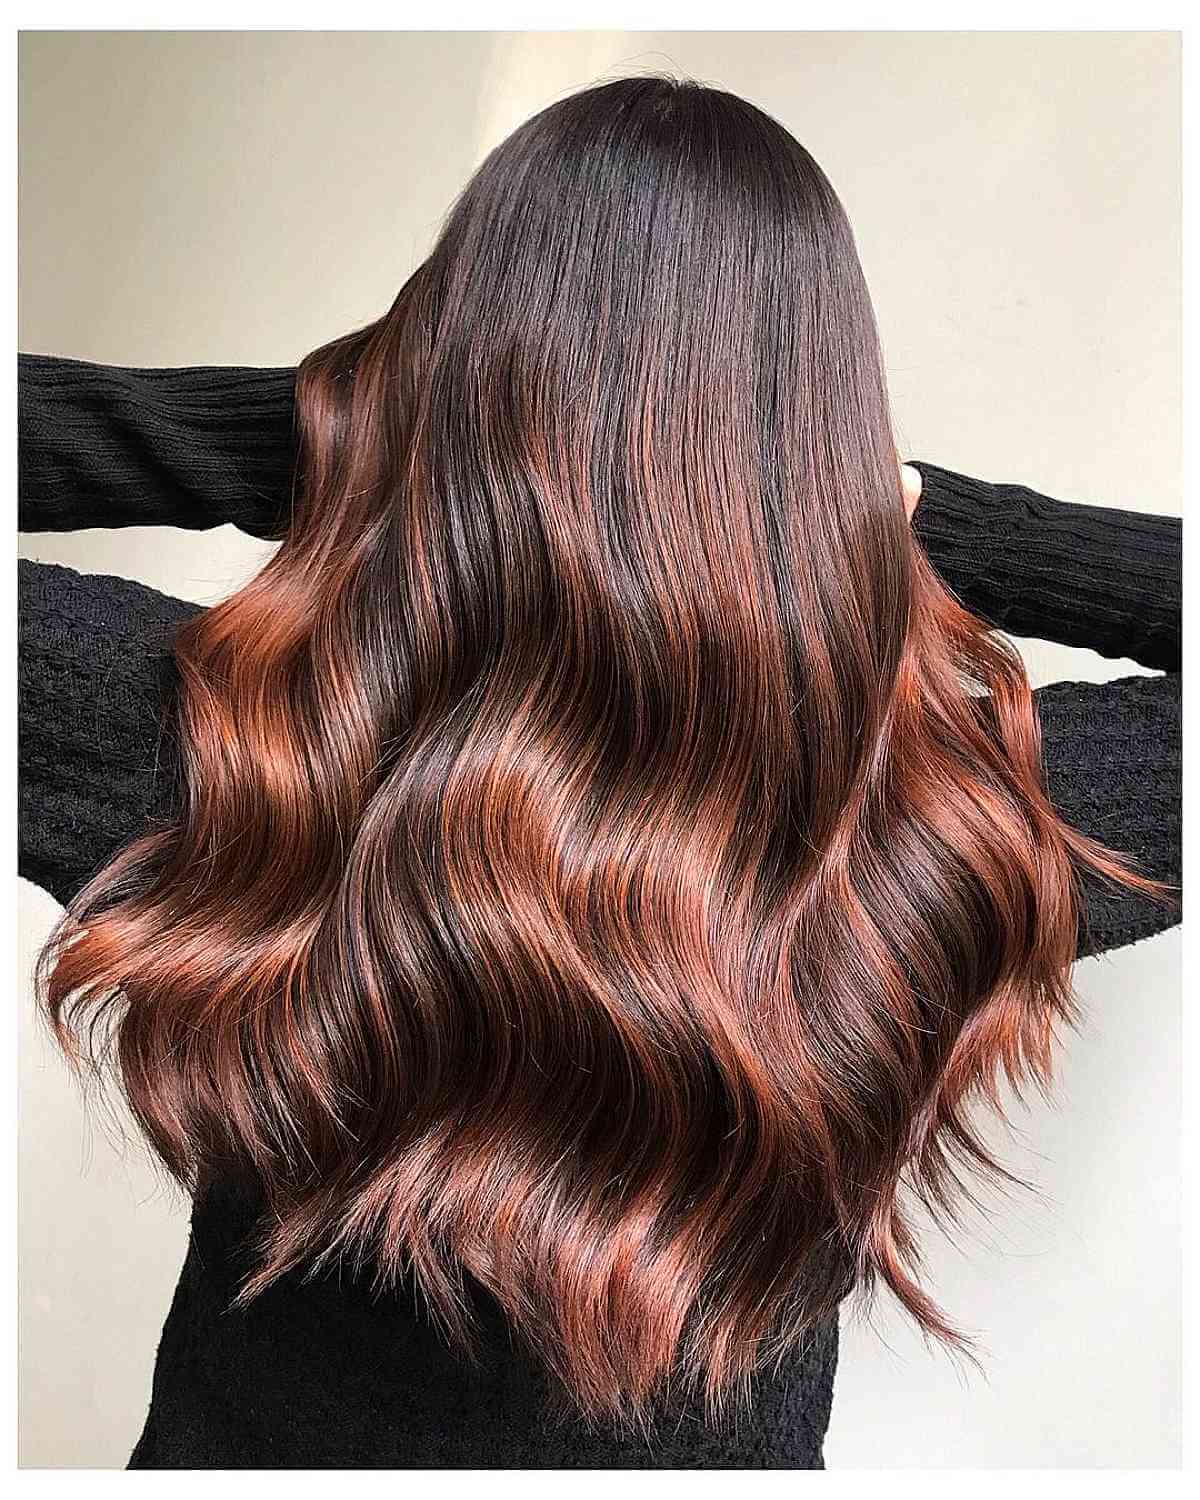 Copper Highlights and Red Balayage Hair